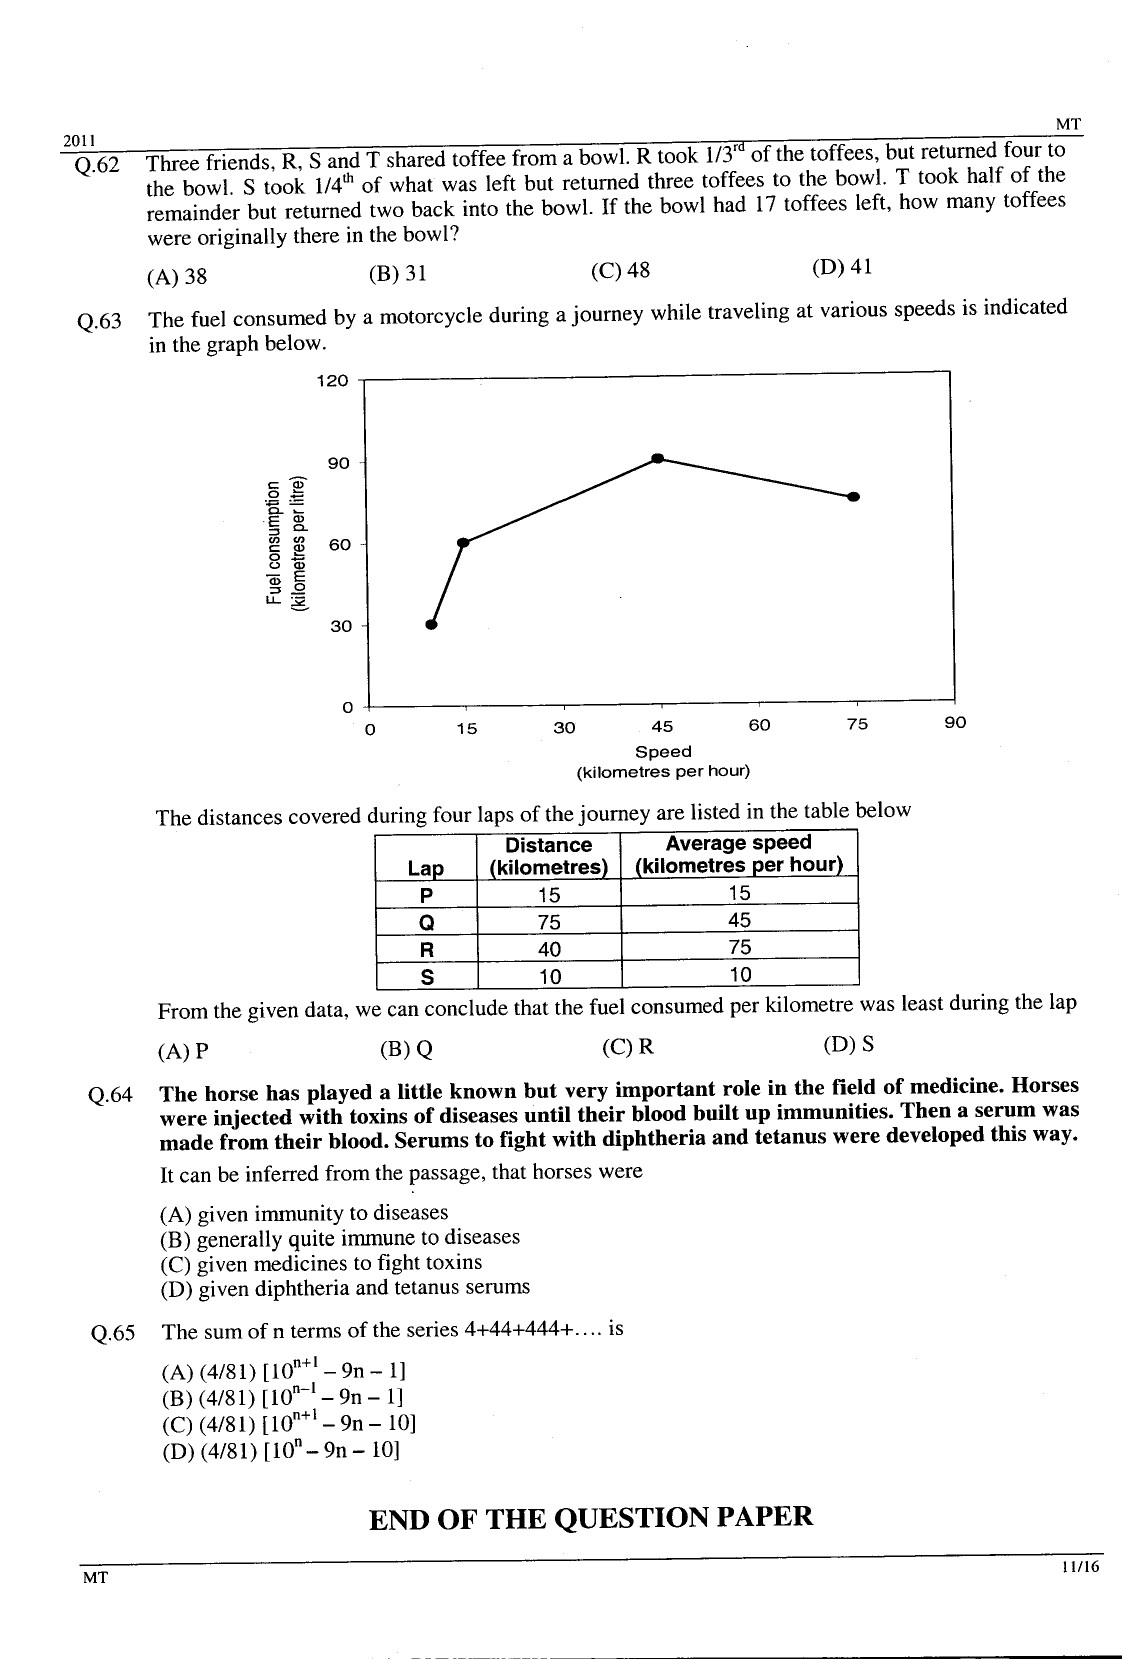 GATE Exam Question Paper 2011 Metallurgical Engineering 11